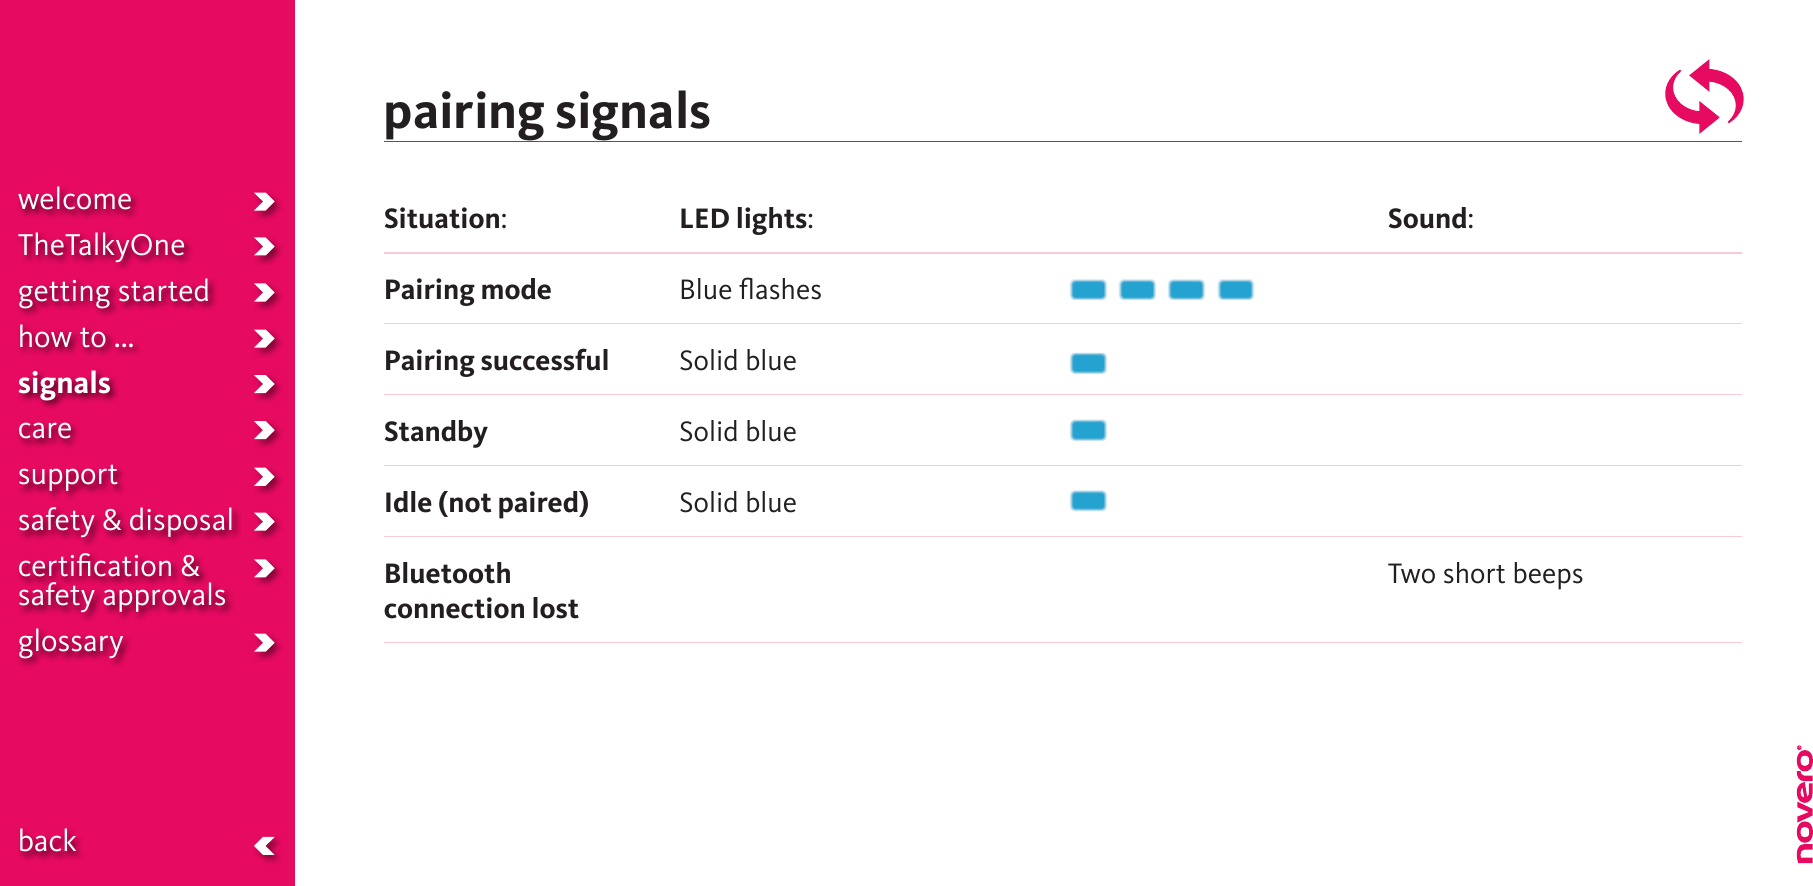 LED lights:Blue ﬂashesSolid blueSolid blueSolid blueSituation: Pairing modePairing successfulStandbyIdle (not paired)Bluetooth  connection lostSound: Two short beepspairing signalswelcomeTheTalkyOnegetting startedhow to ...signalscaresupportsafety &amp; disposalcertiﬁcation &amp;  safety approvals glossary  back